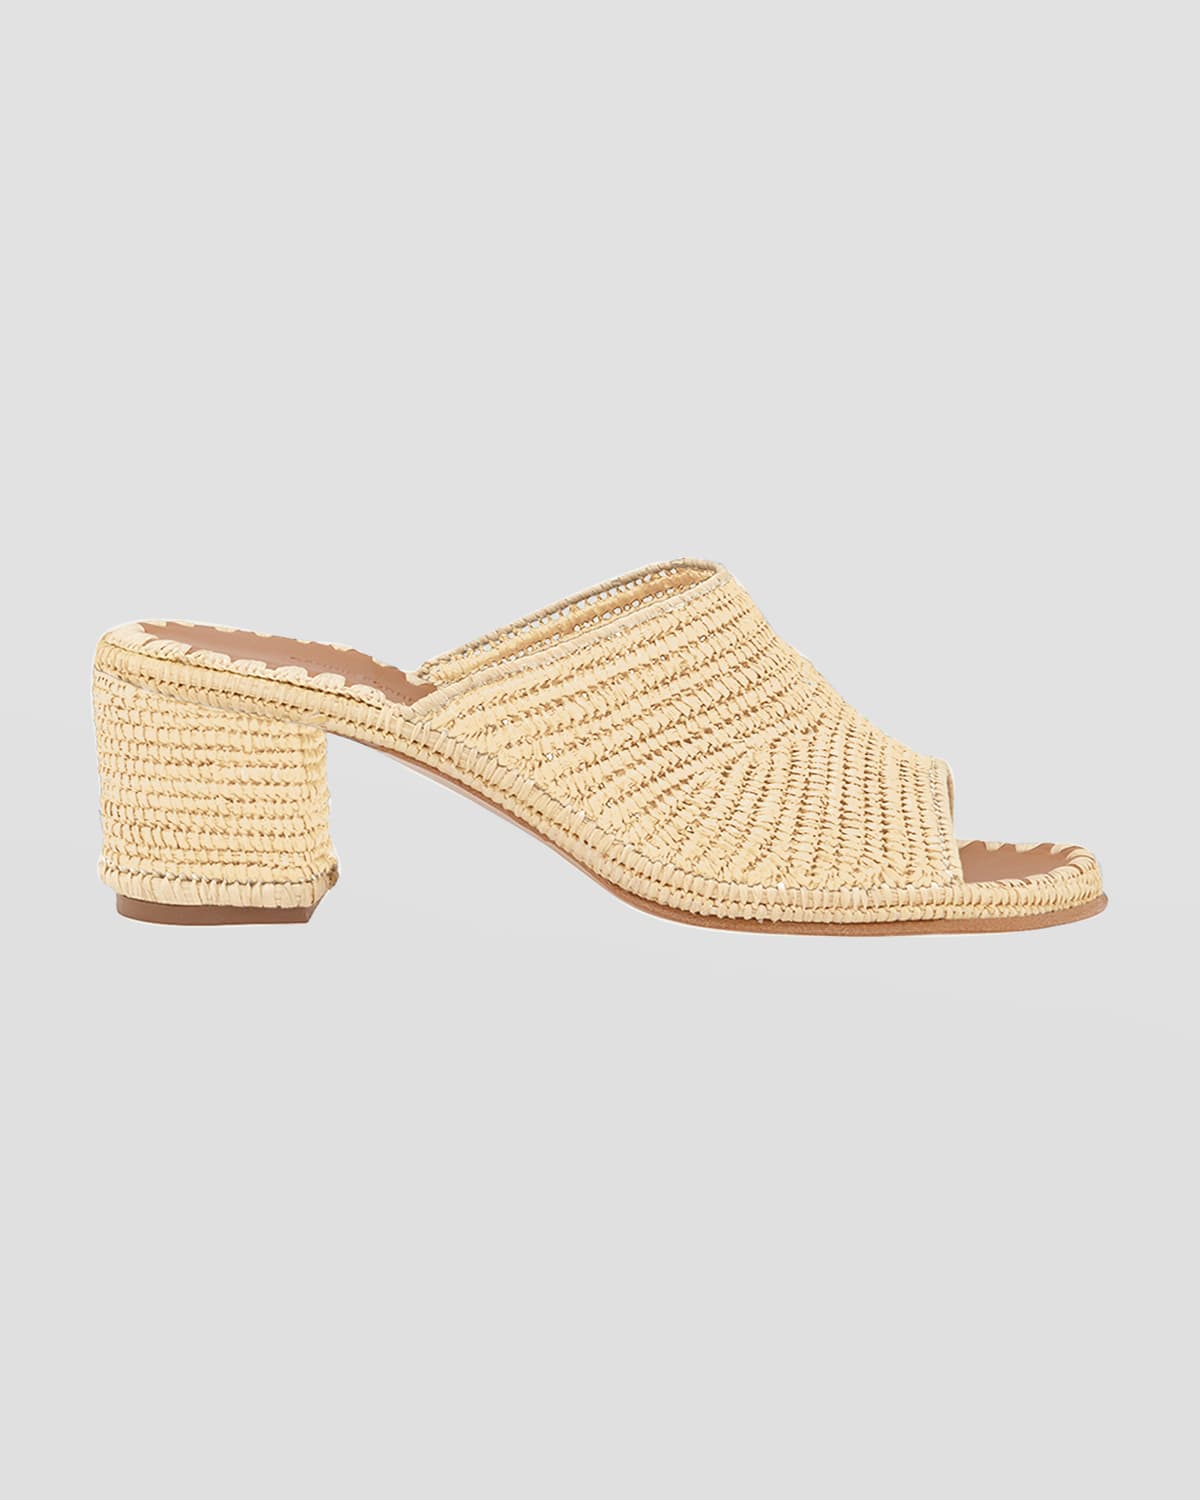 Shop Carrie Forbes Rama Woven Raffia Slide Sandals In Natural